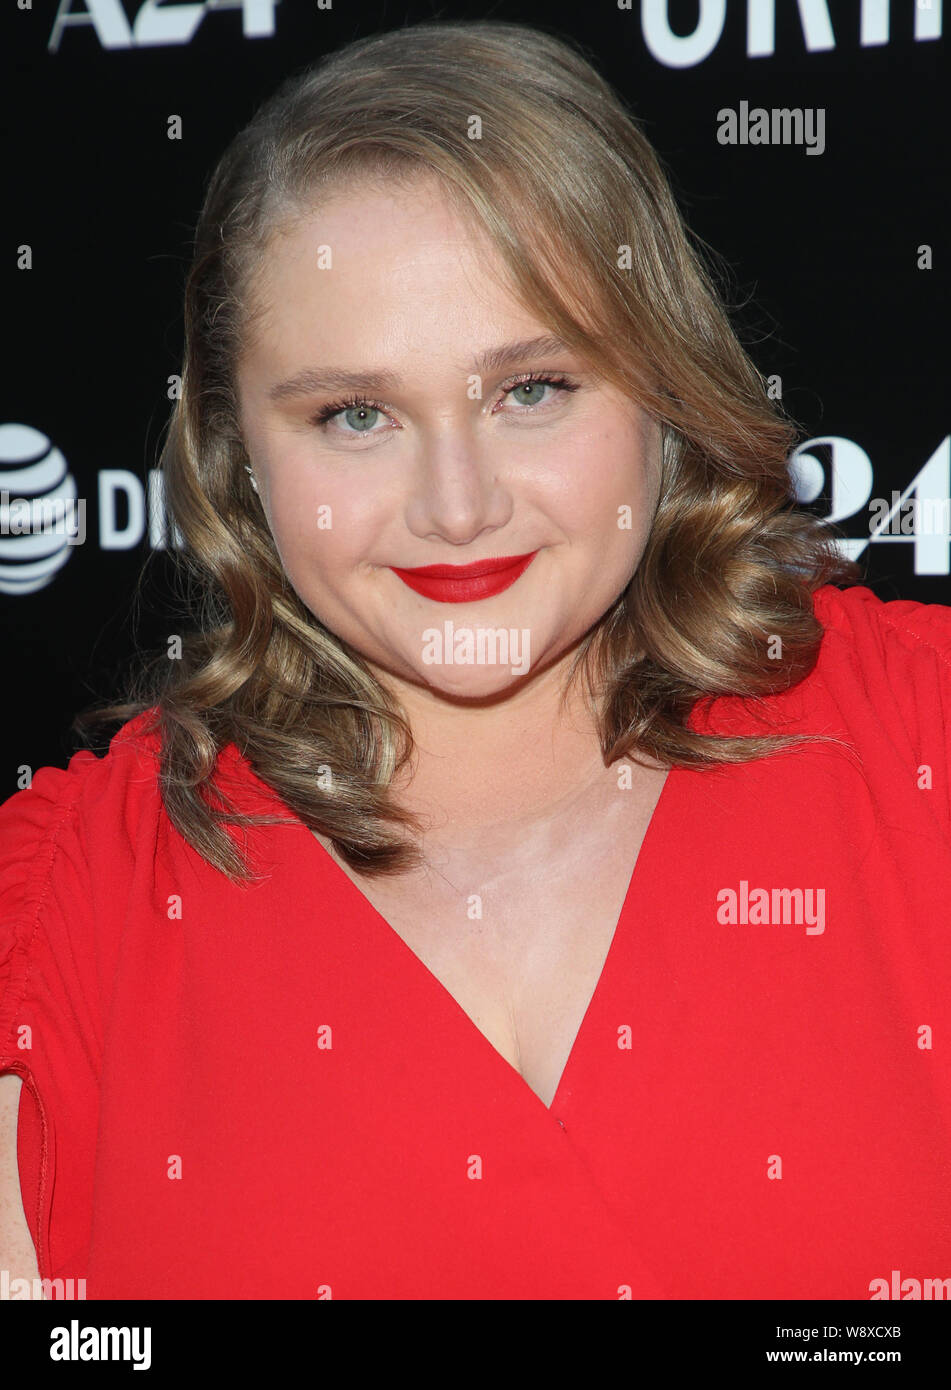 Los Angeles Special Screening Of Skin Featuring Danielle Macdonald